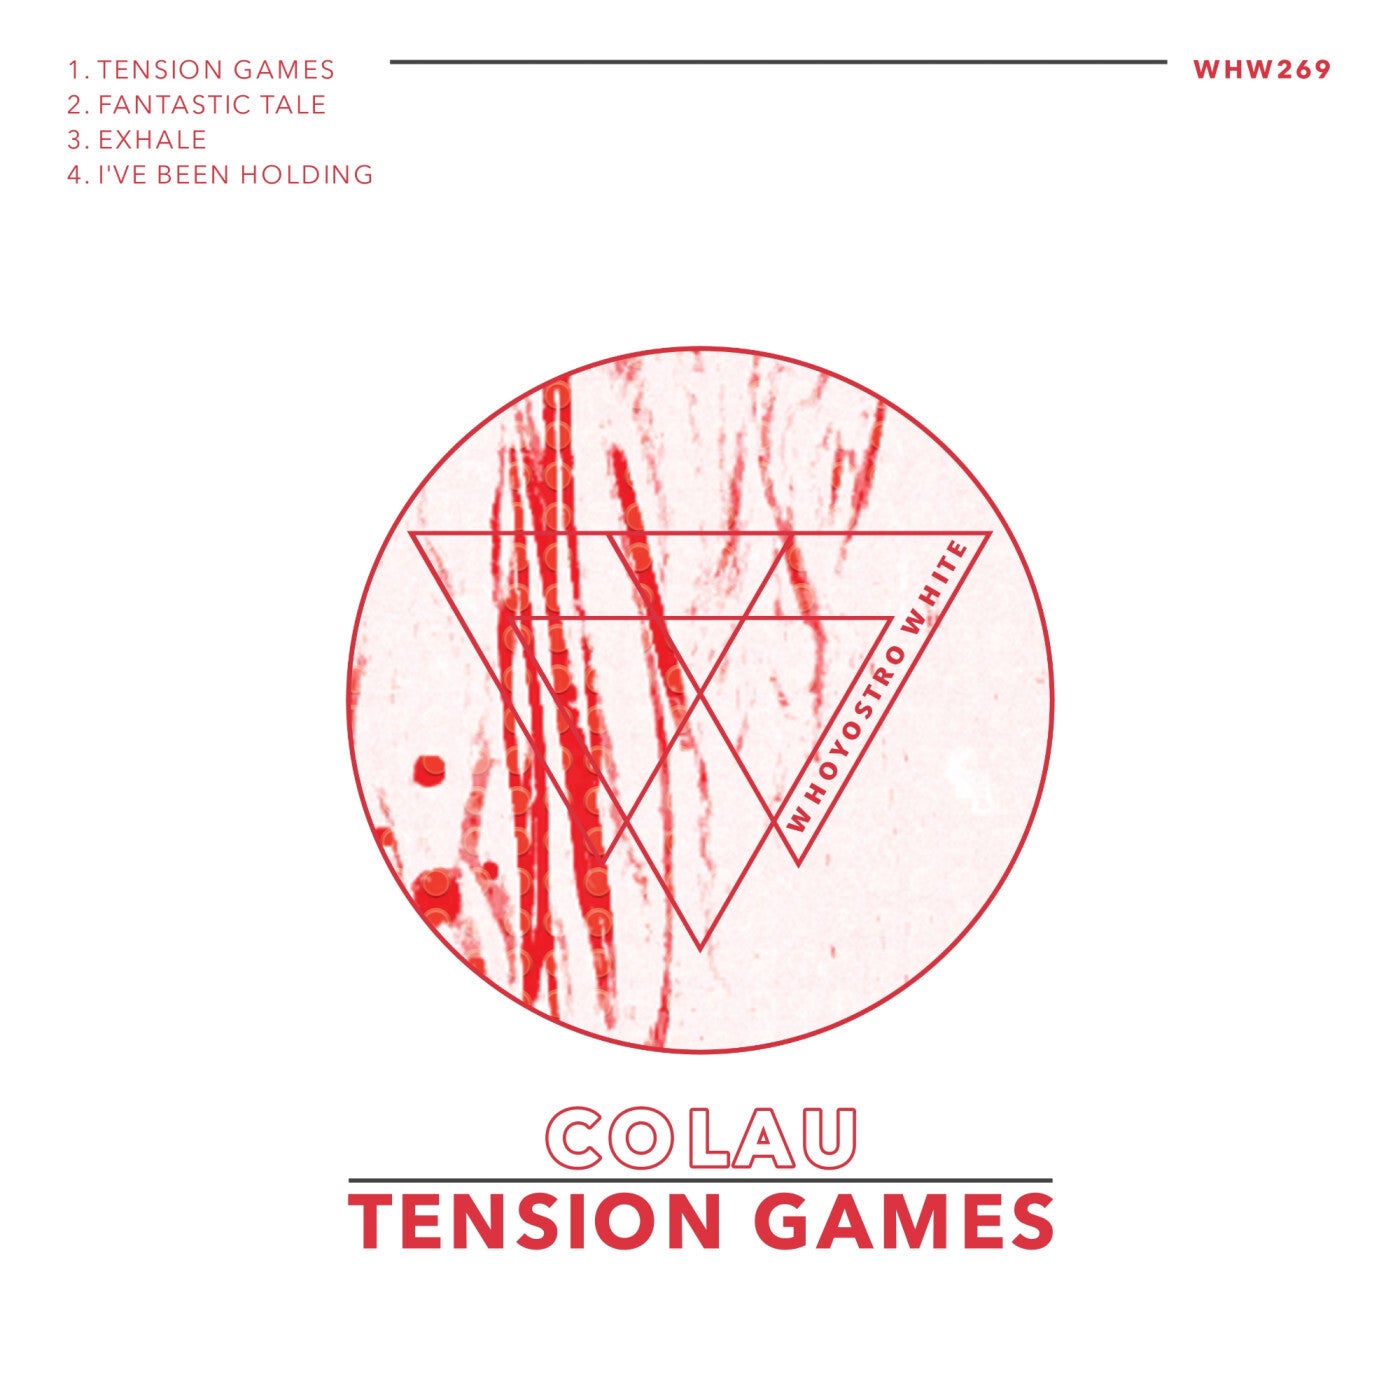 Tension Games